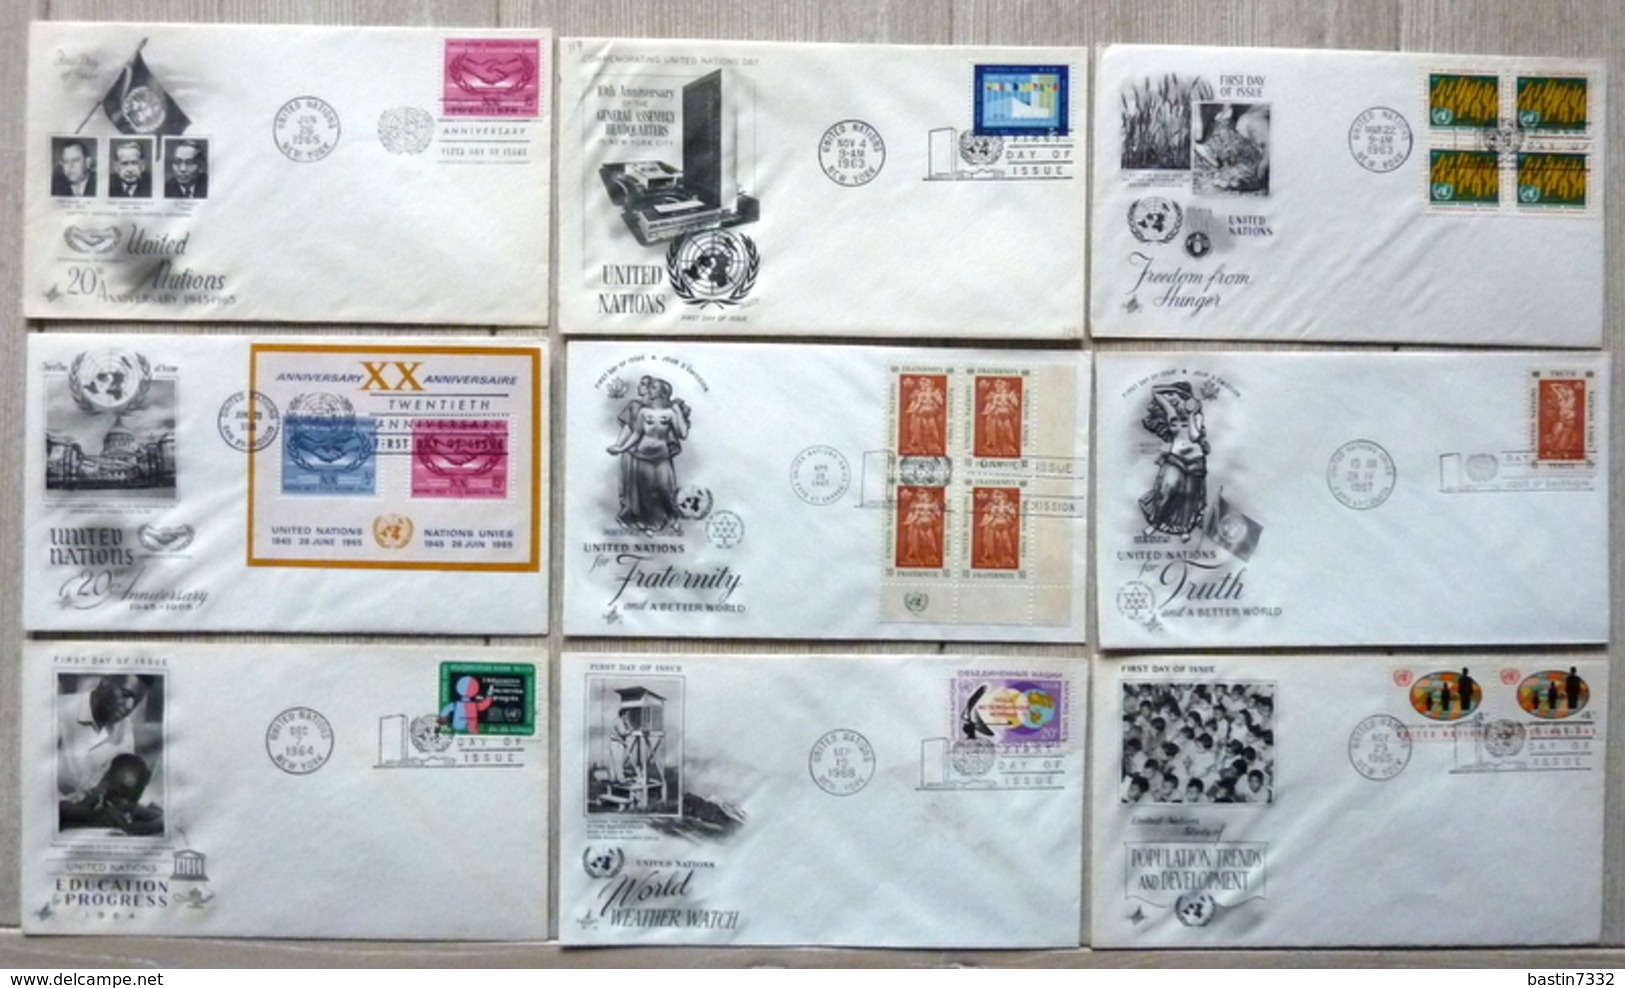 Box with FDC,letters,covers,Maximum cards,brieven and more....